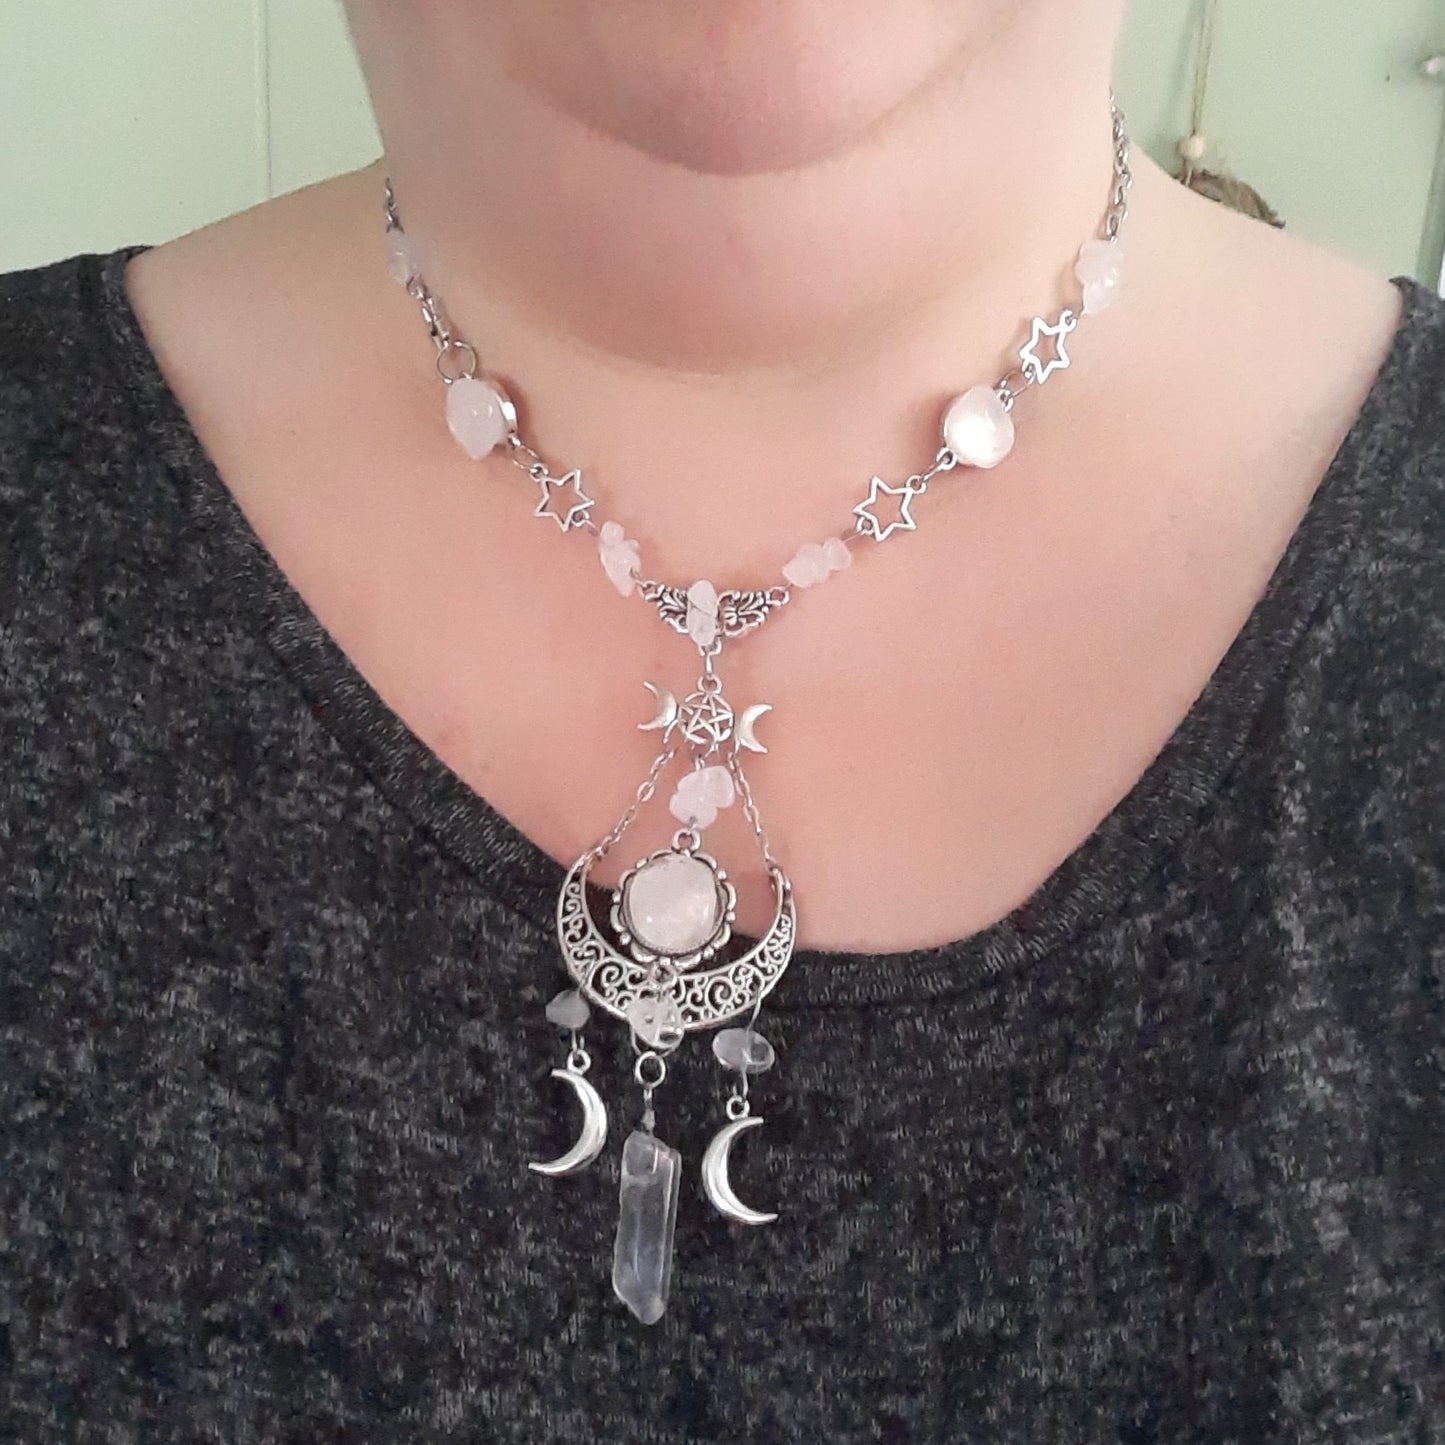 Hekate Choker Necklace Triple Moon Goddess Clear Quartz Maximalist style Statement necklace Witchy Jewelry Pagan Adjustable plus size choker